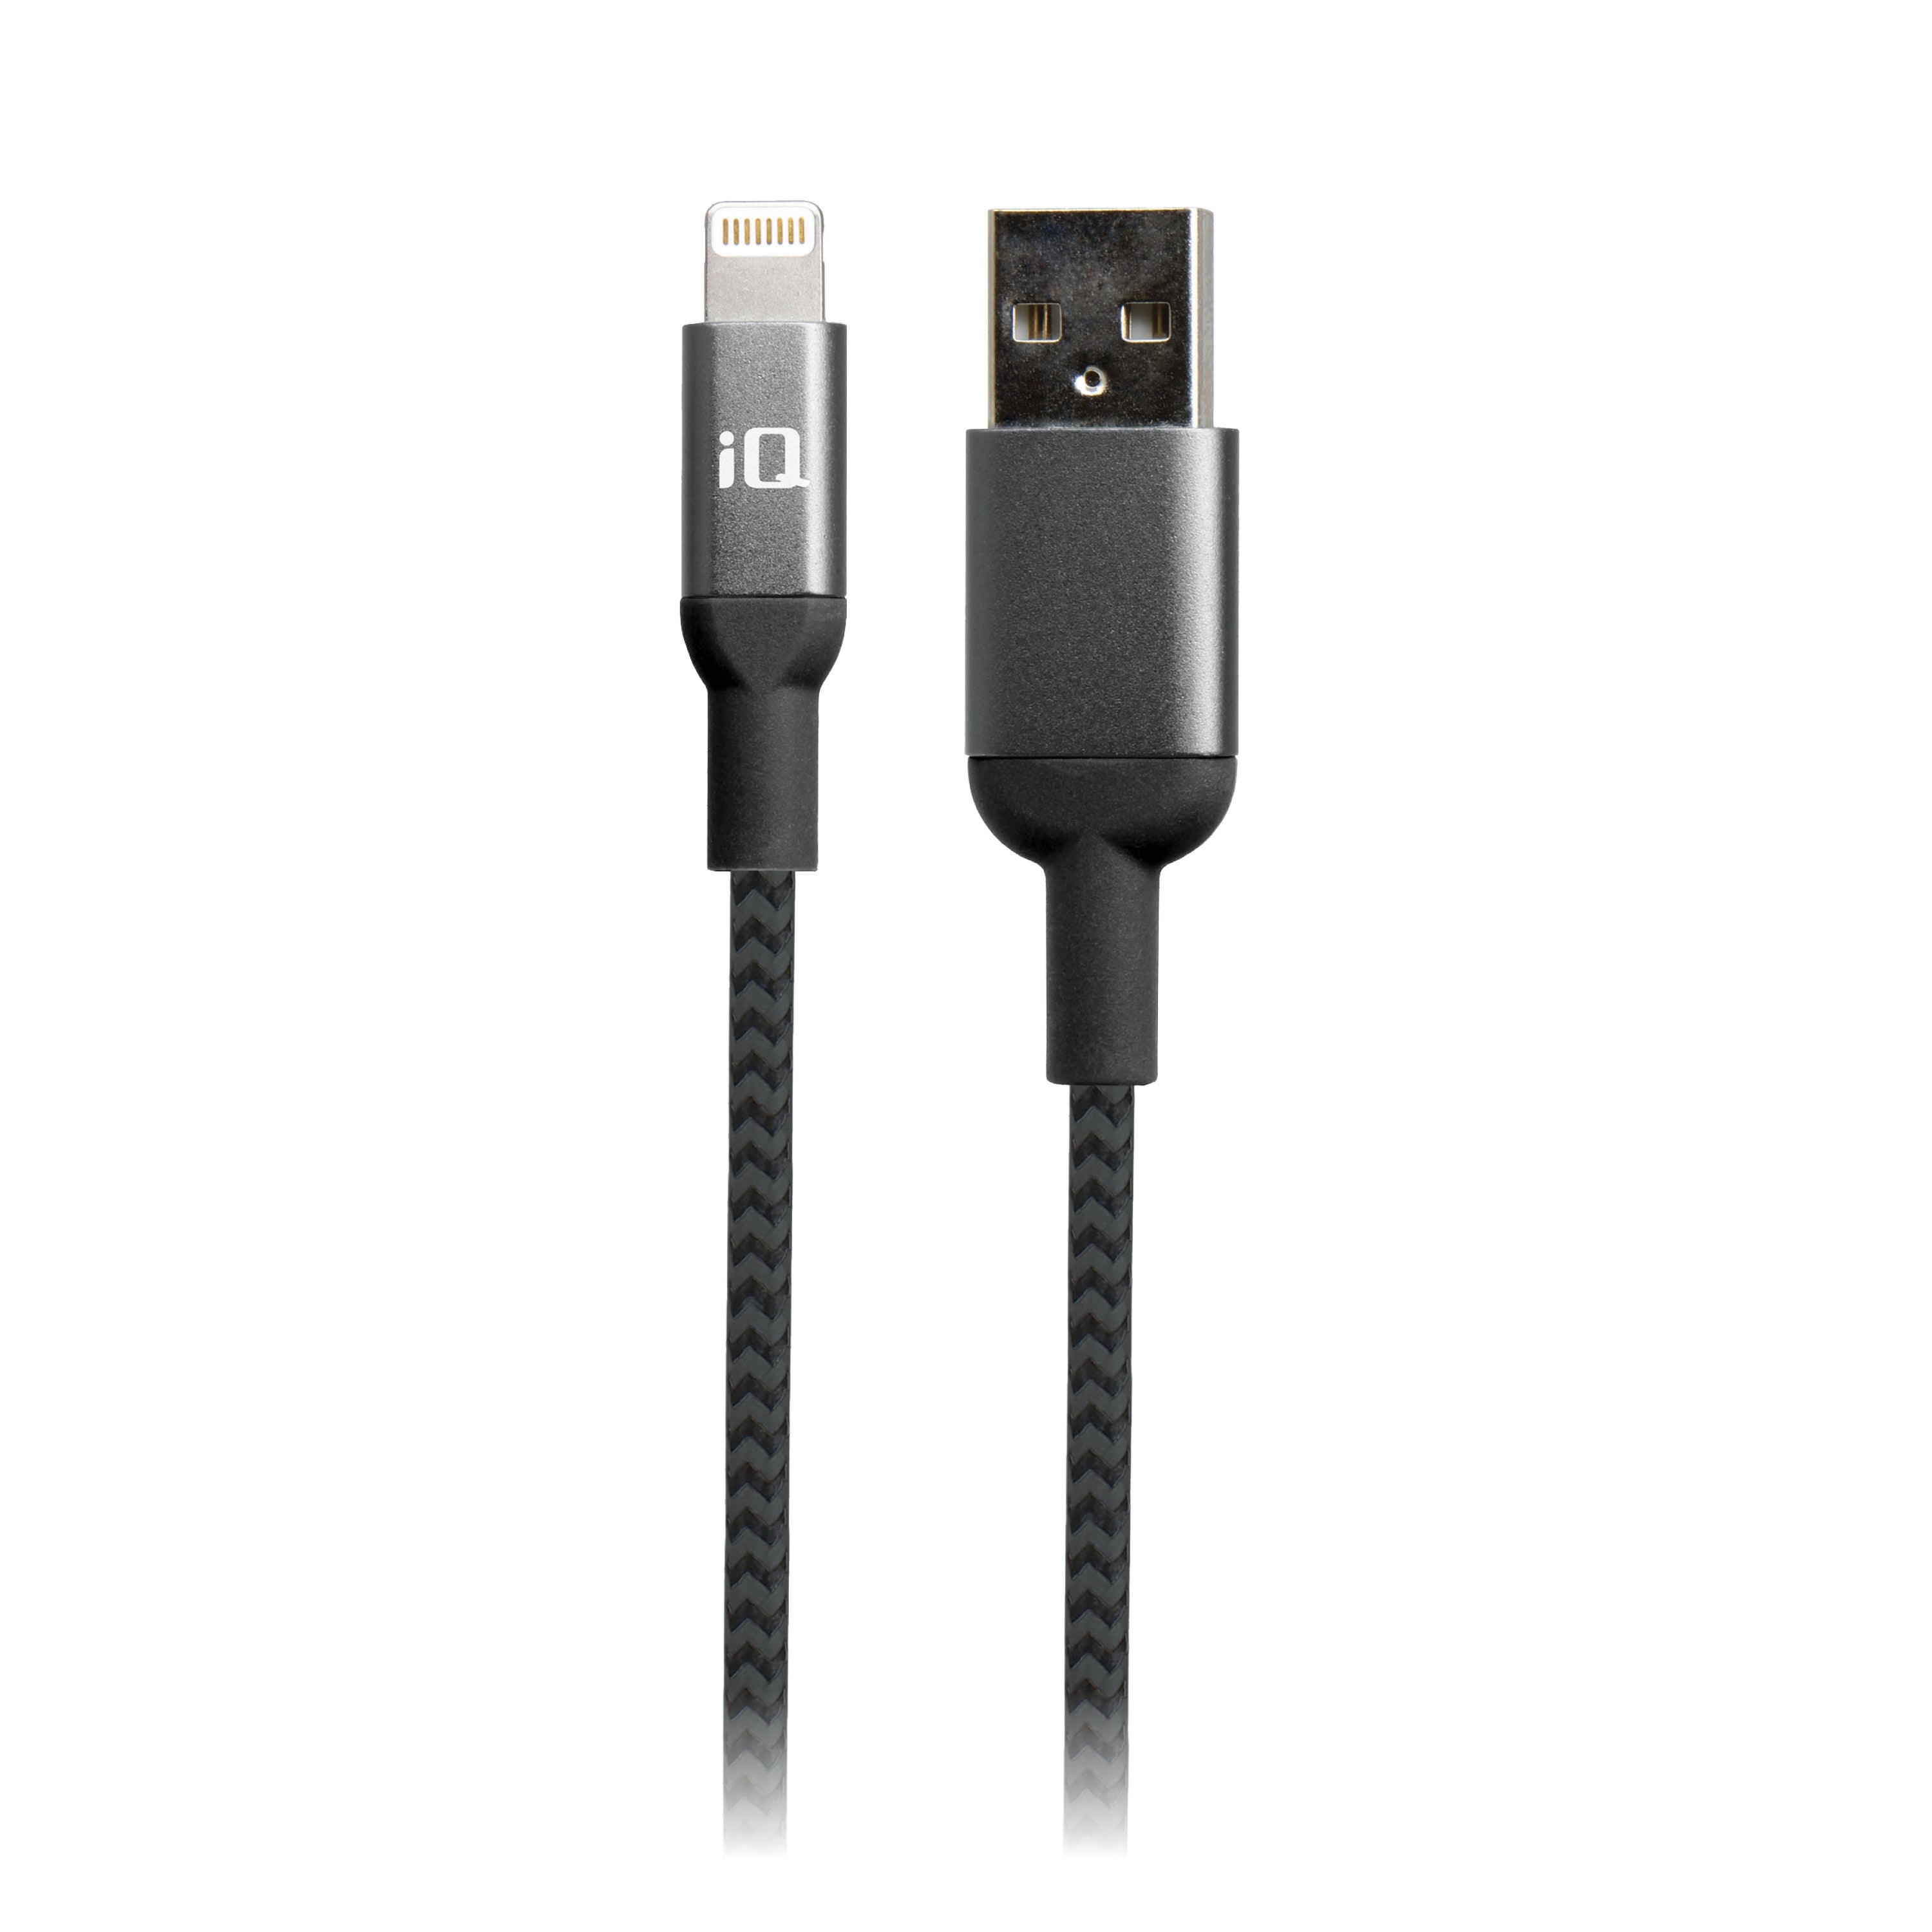 iQ Lightning Charge & Sync Cable - 2m/6ft